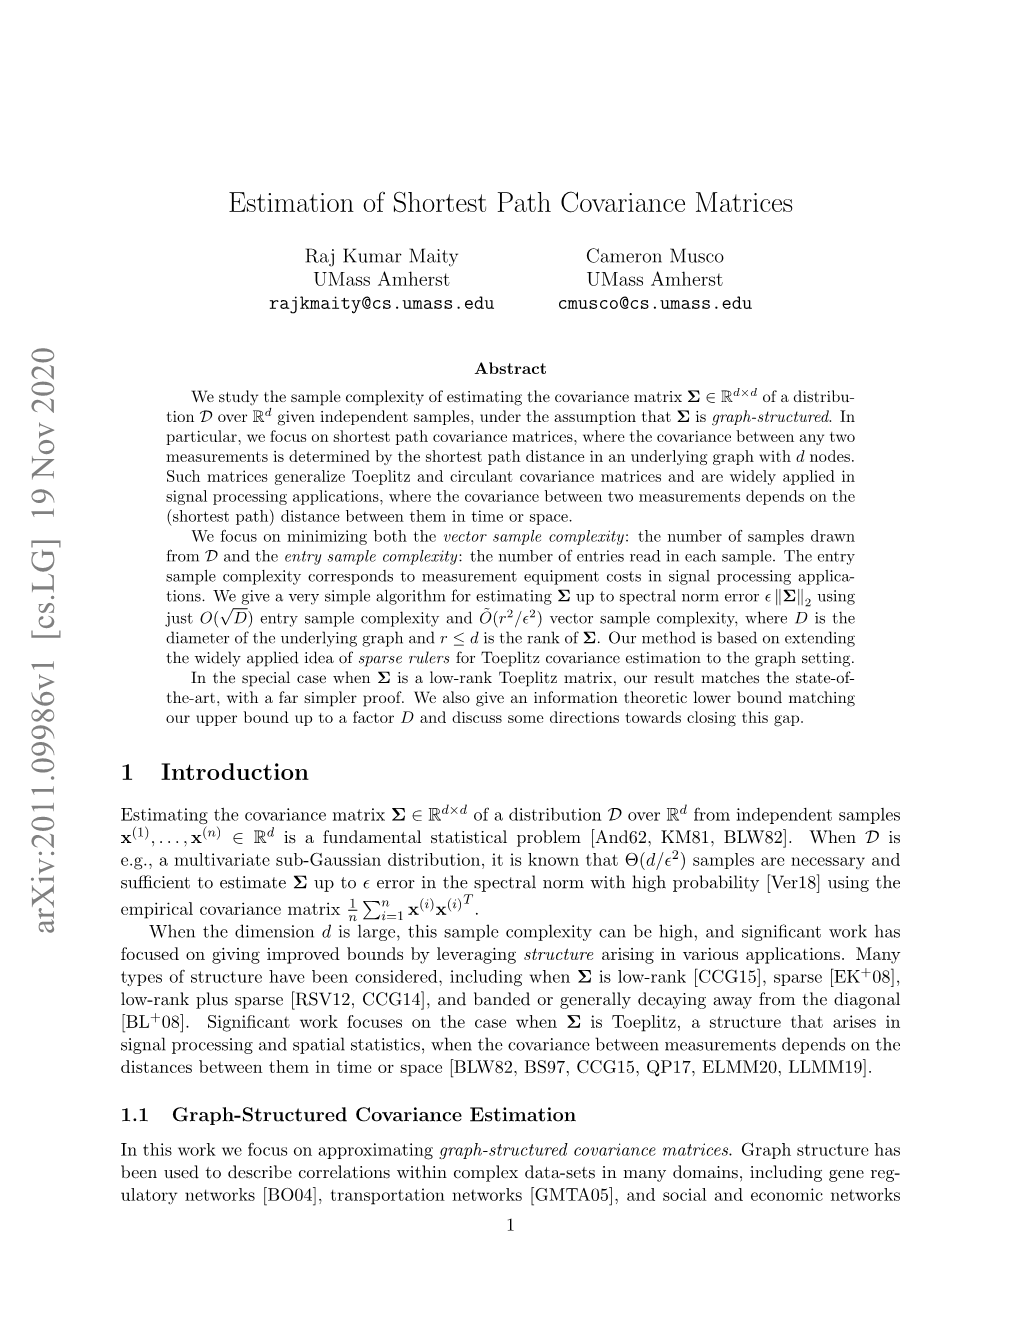 Estimation of Shortest Path Covariance Matrices